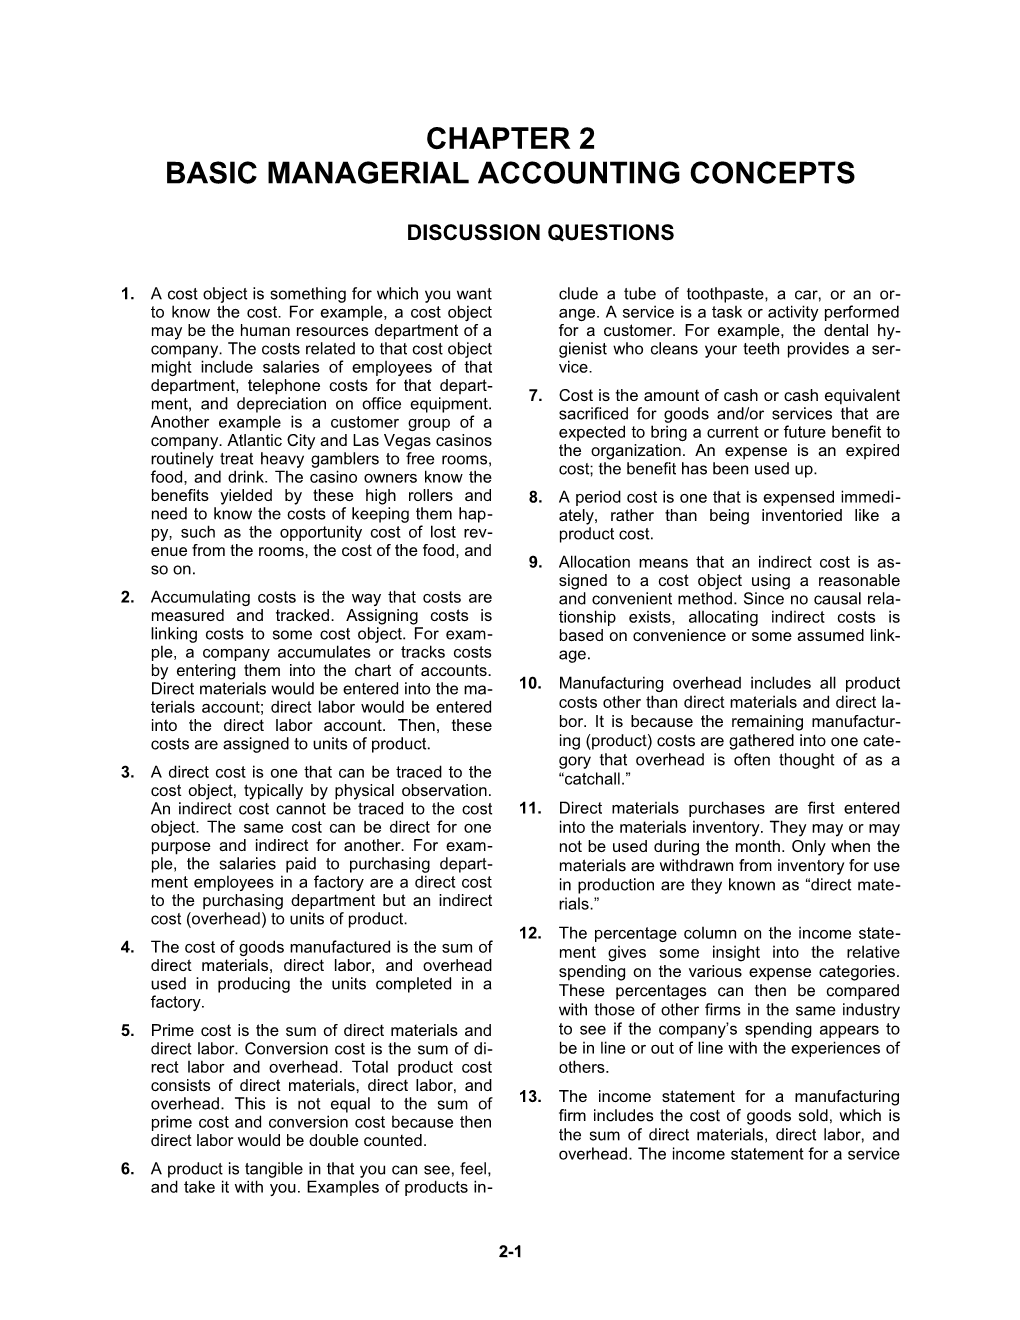 Chapter 2Basic Managerial Accounting Concepts